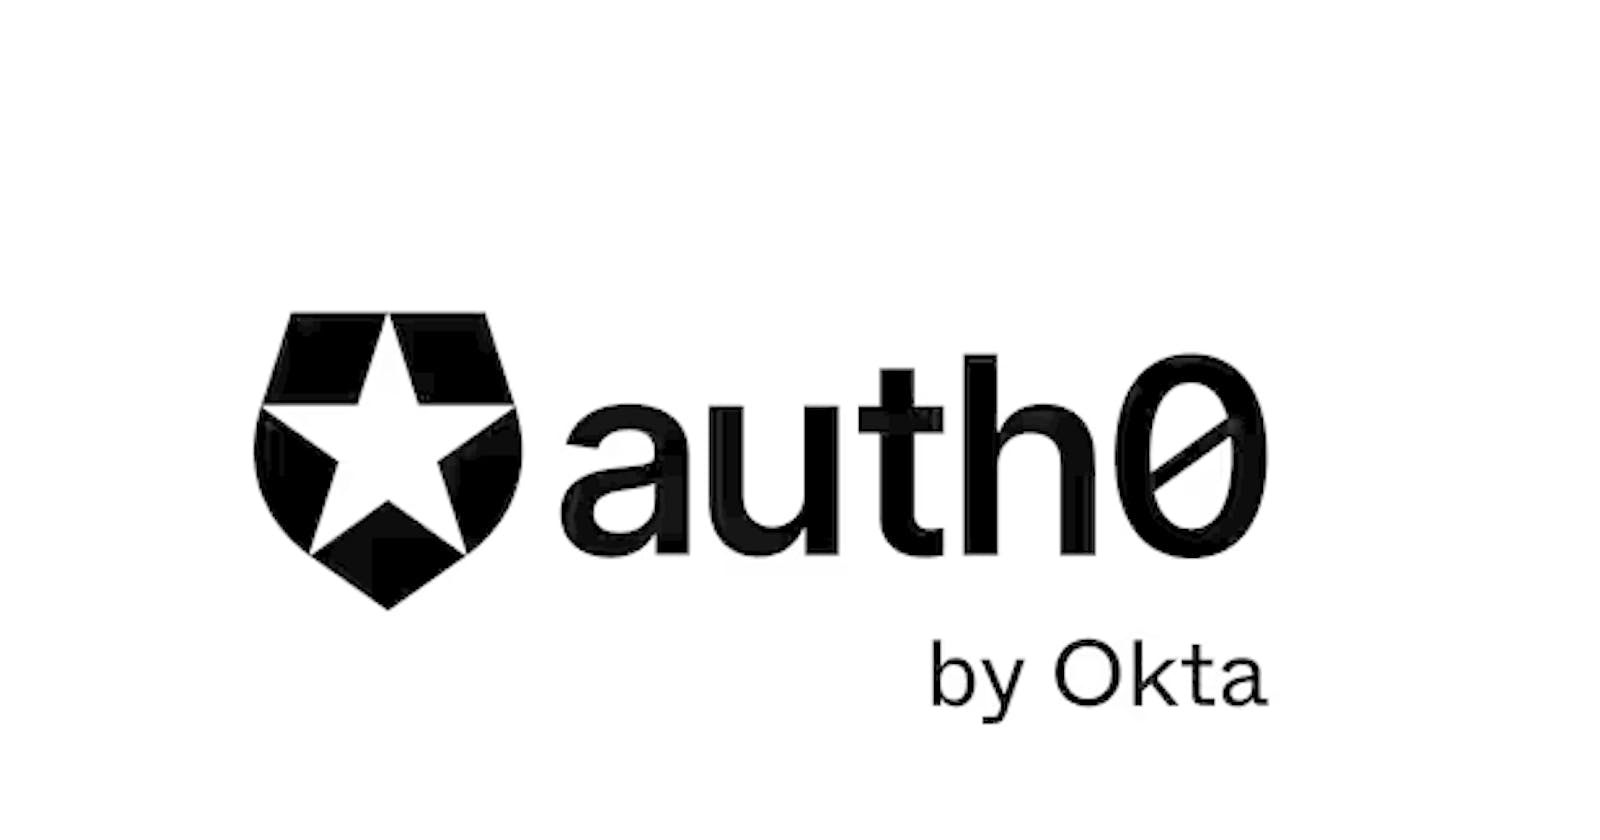 How to use Auth0 to protect your APIs